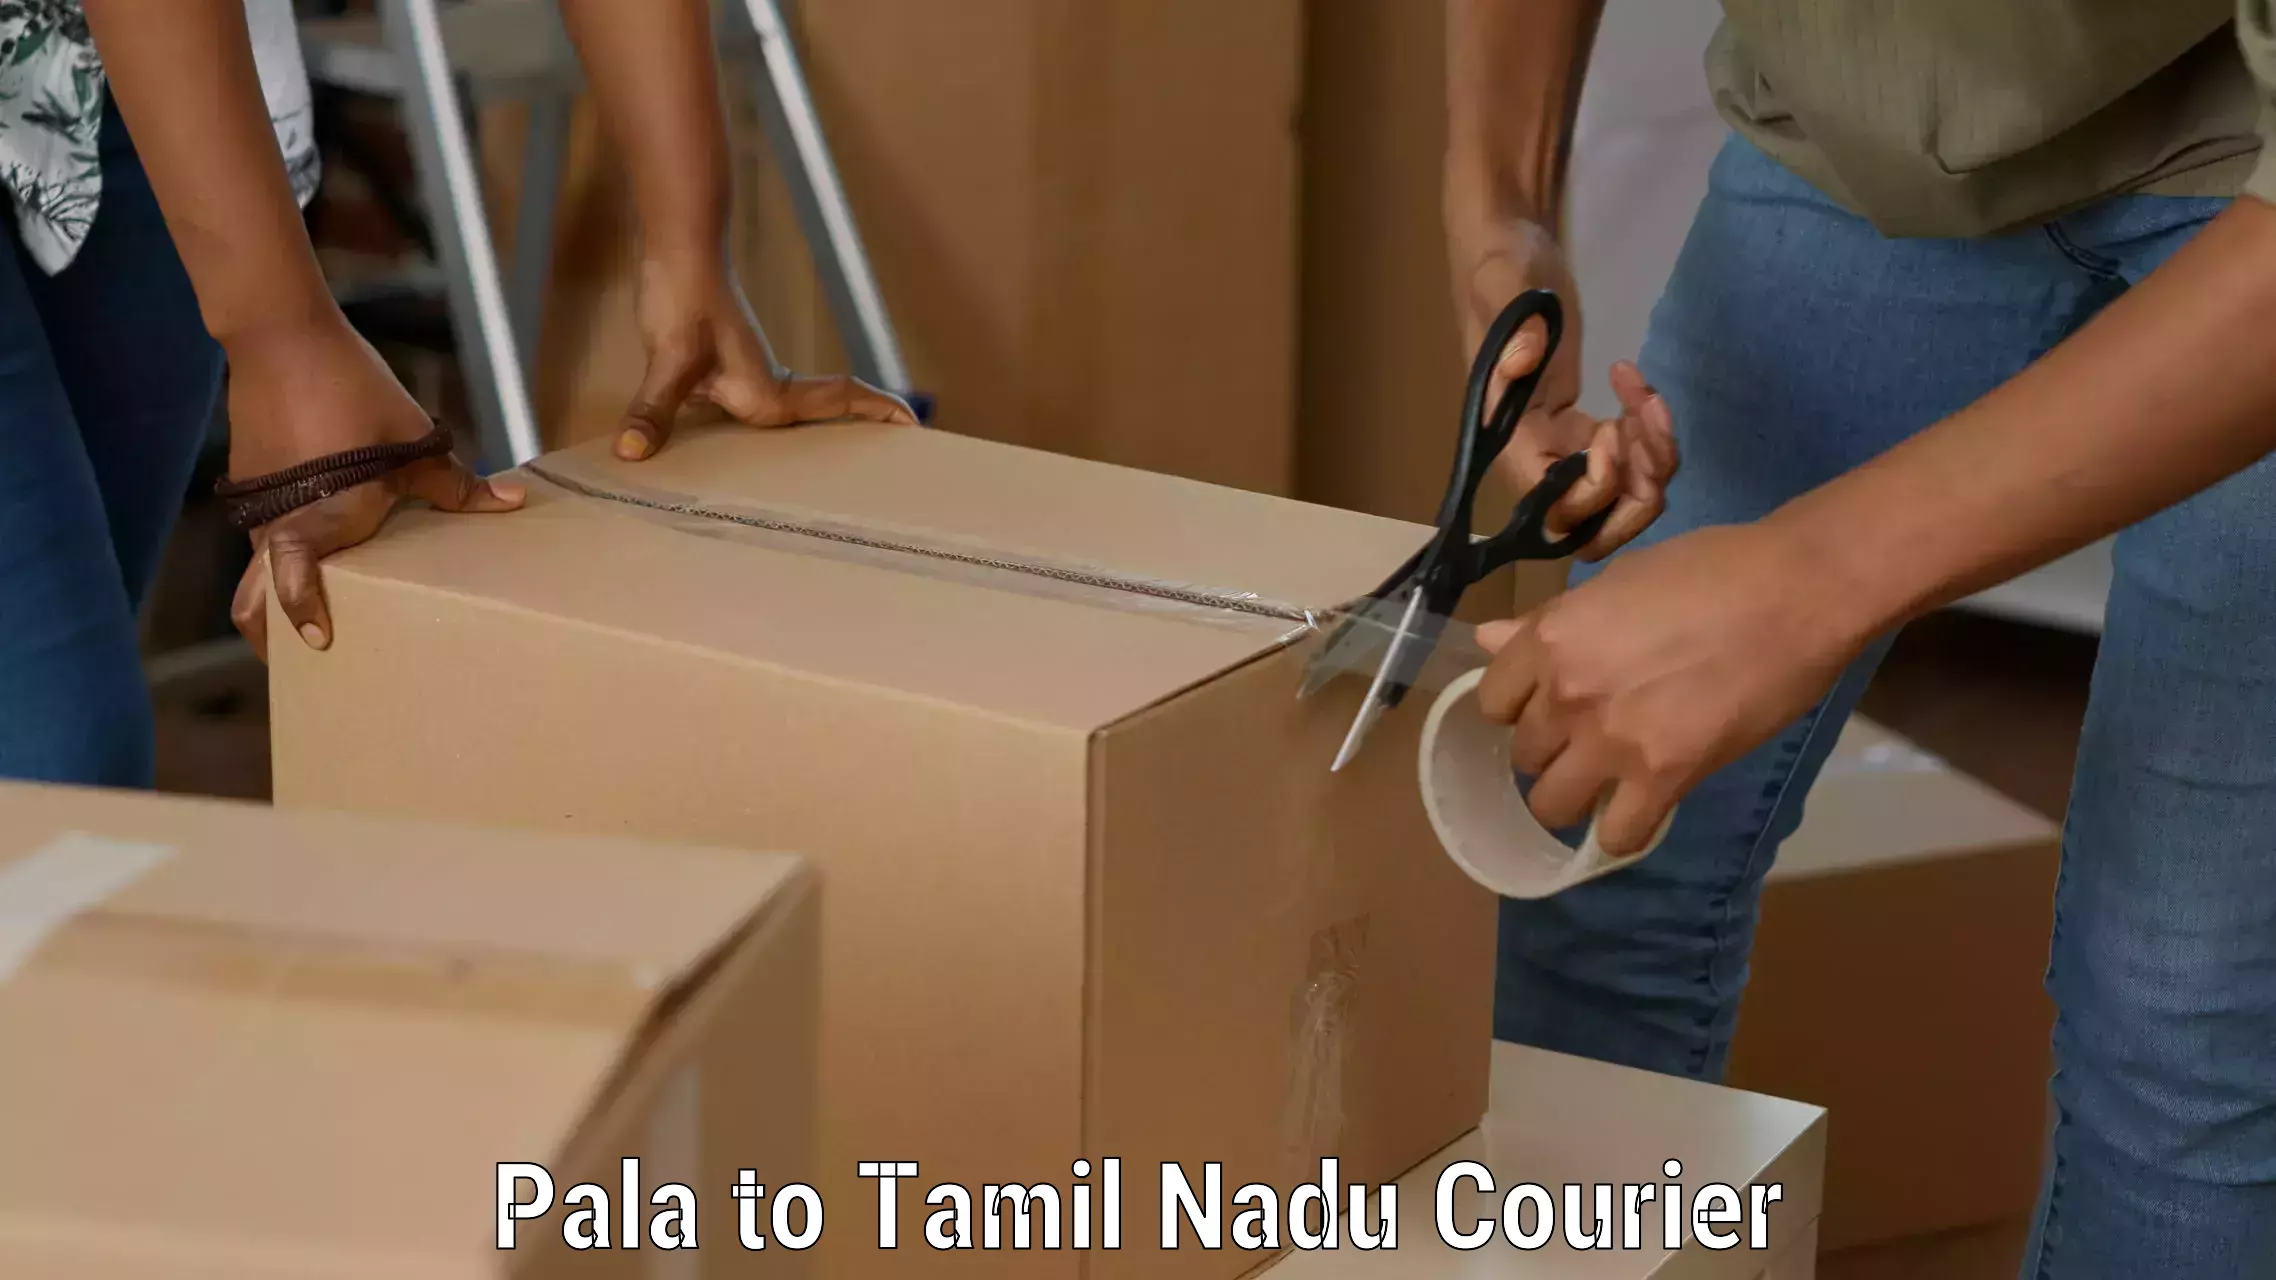 Professional courier services Pala to Vellore Institute of Technology